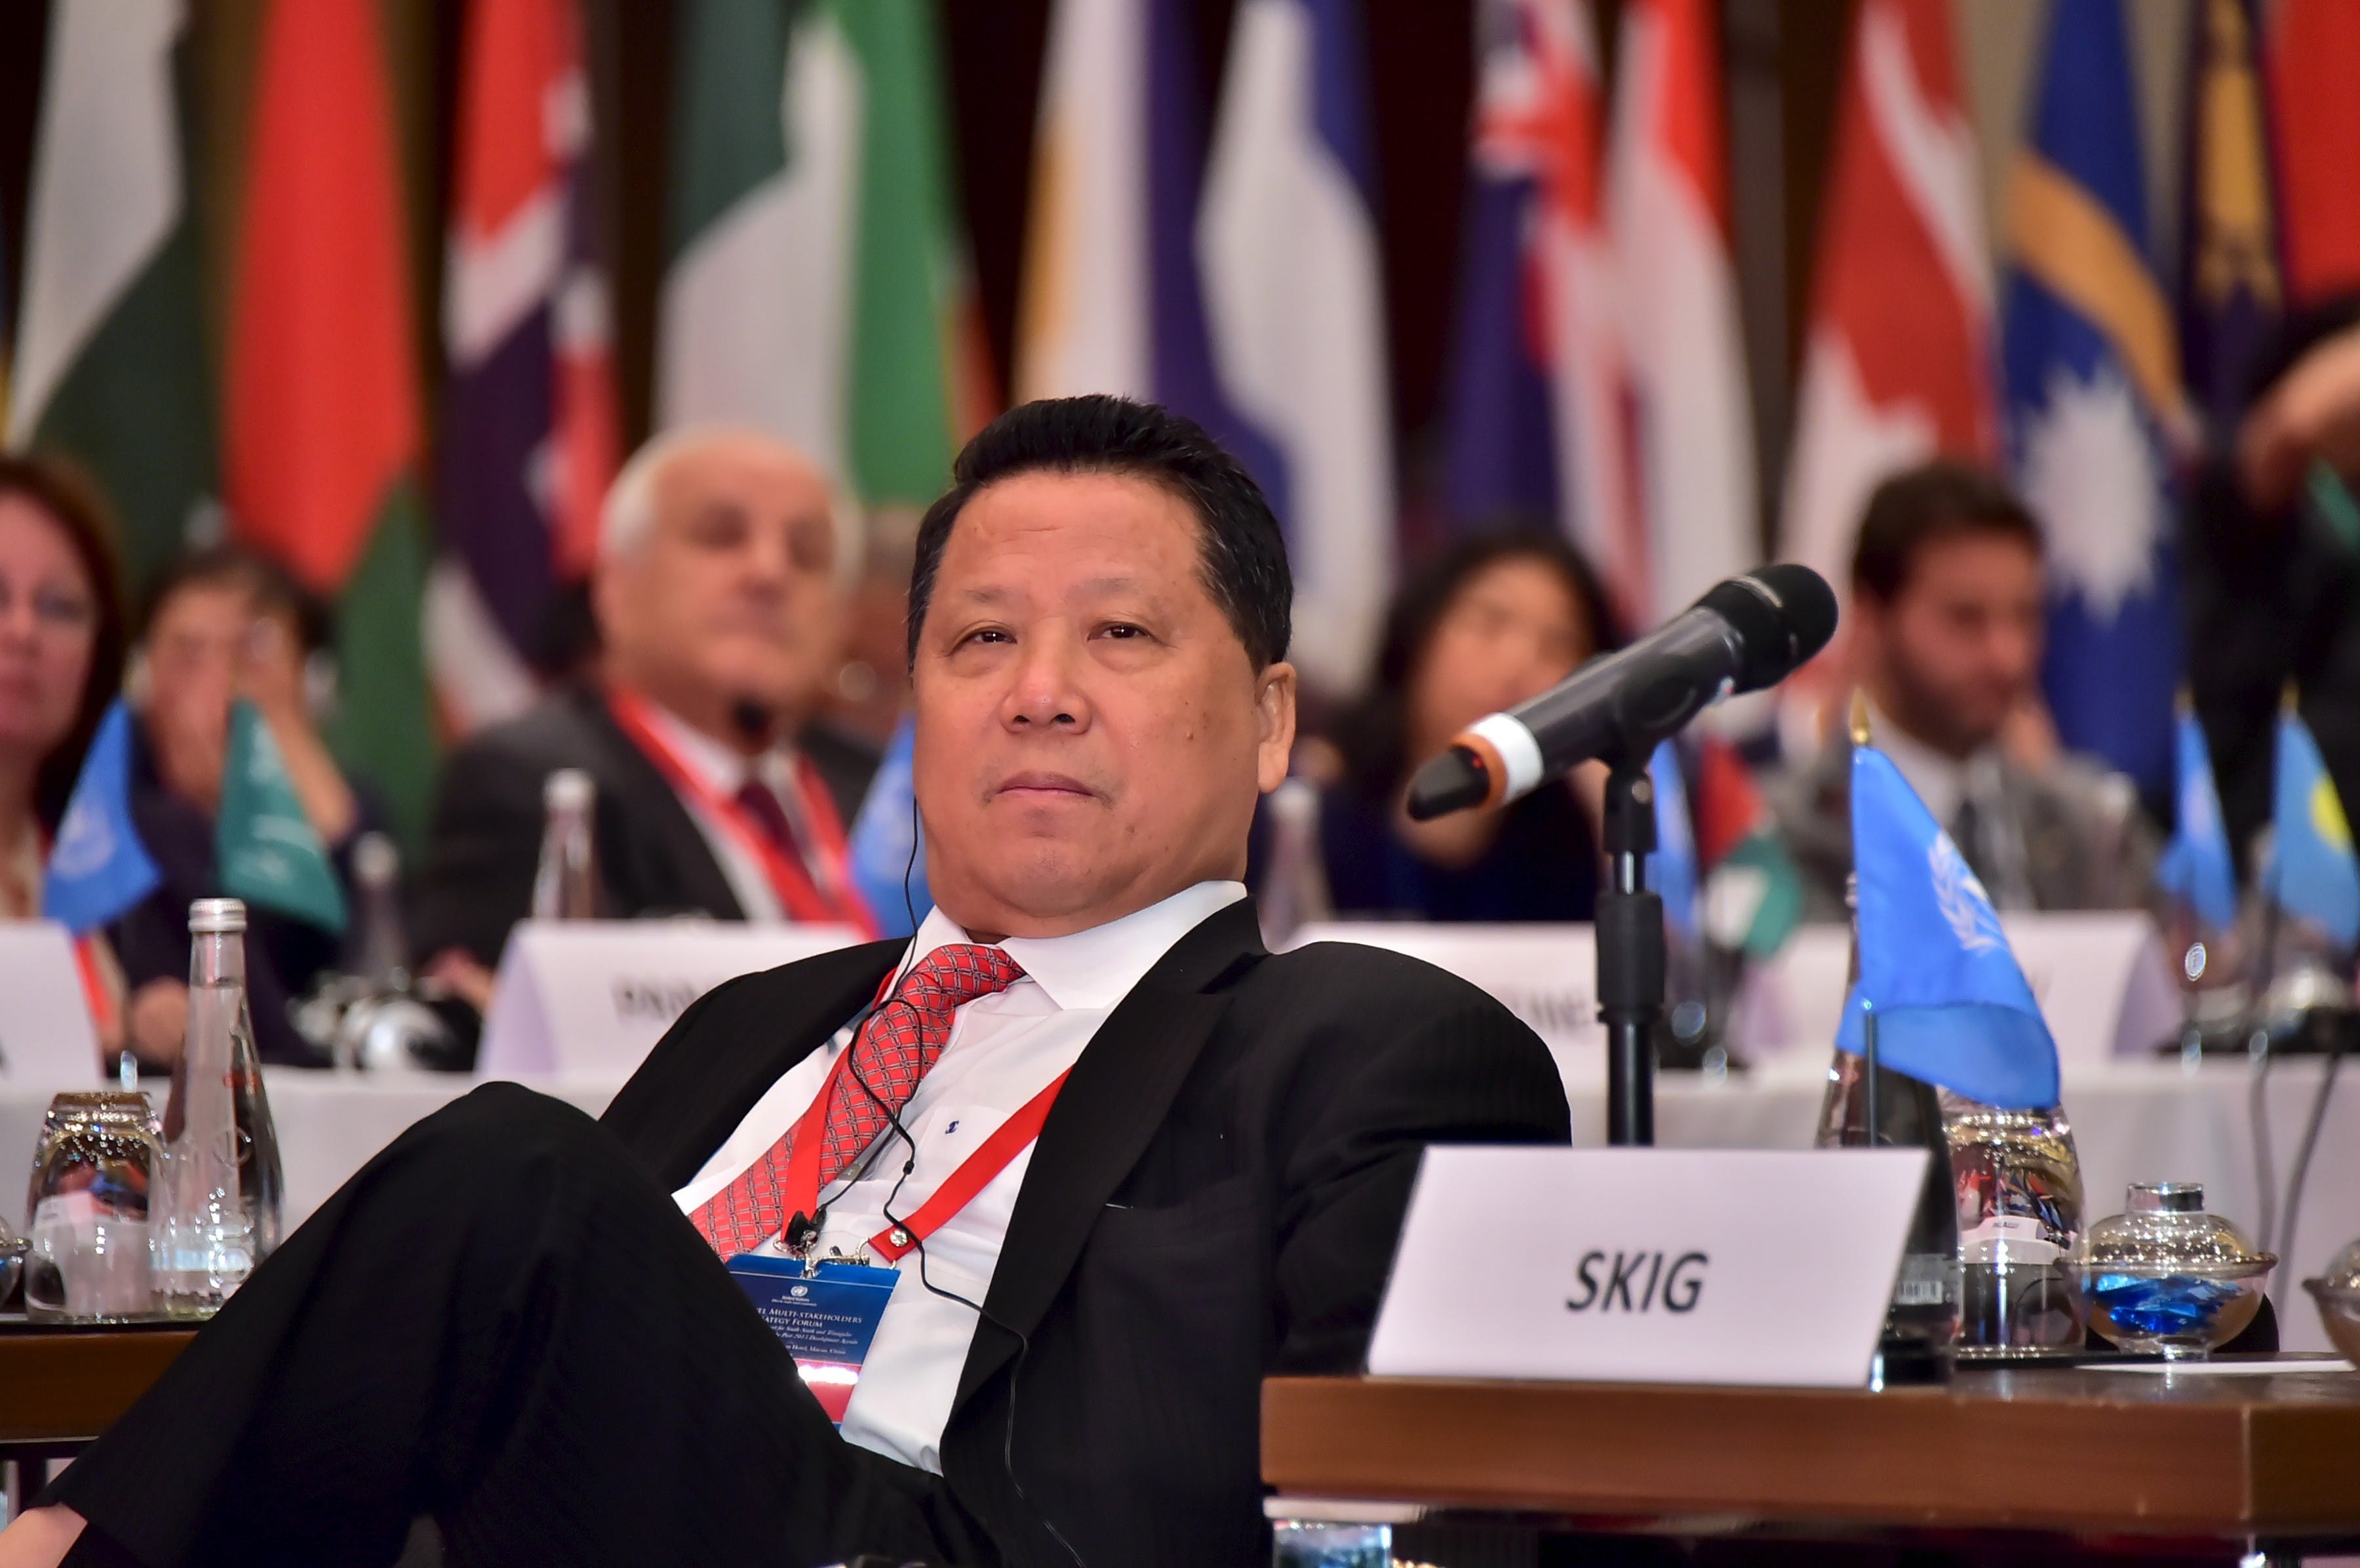 David Ng, Chairman of the Sun Kian IP Group Foundation sits at the High-level Multi-Stakeholder Strategy Forum in Macau